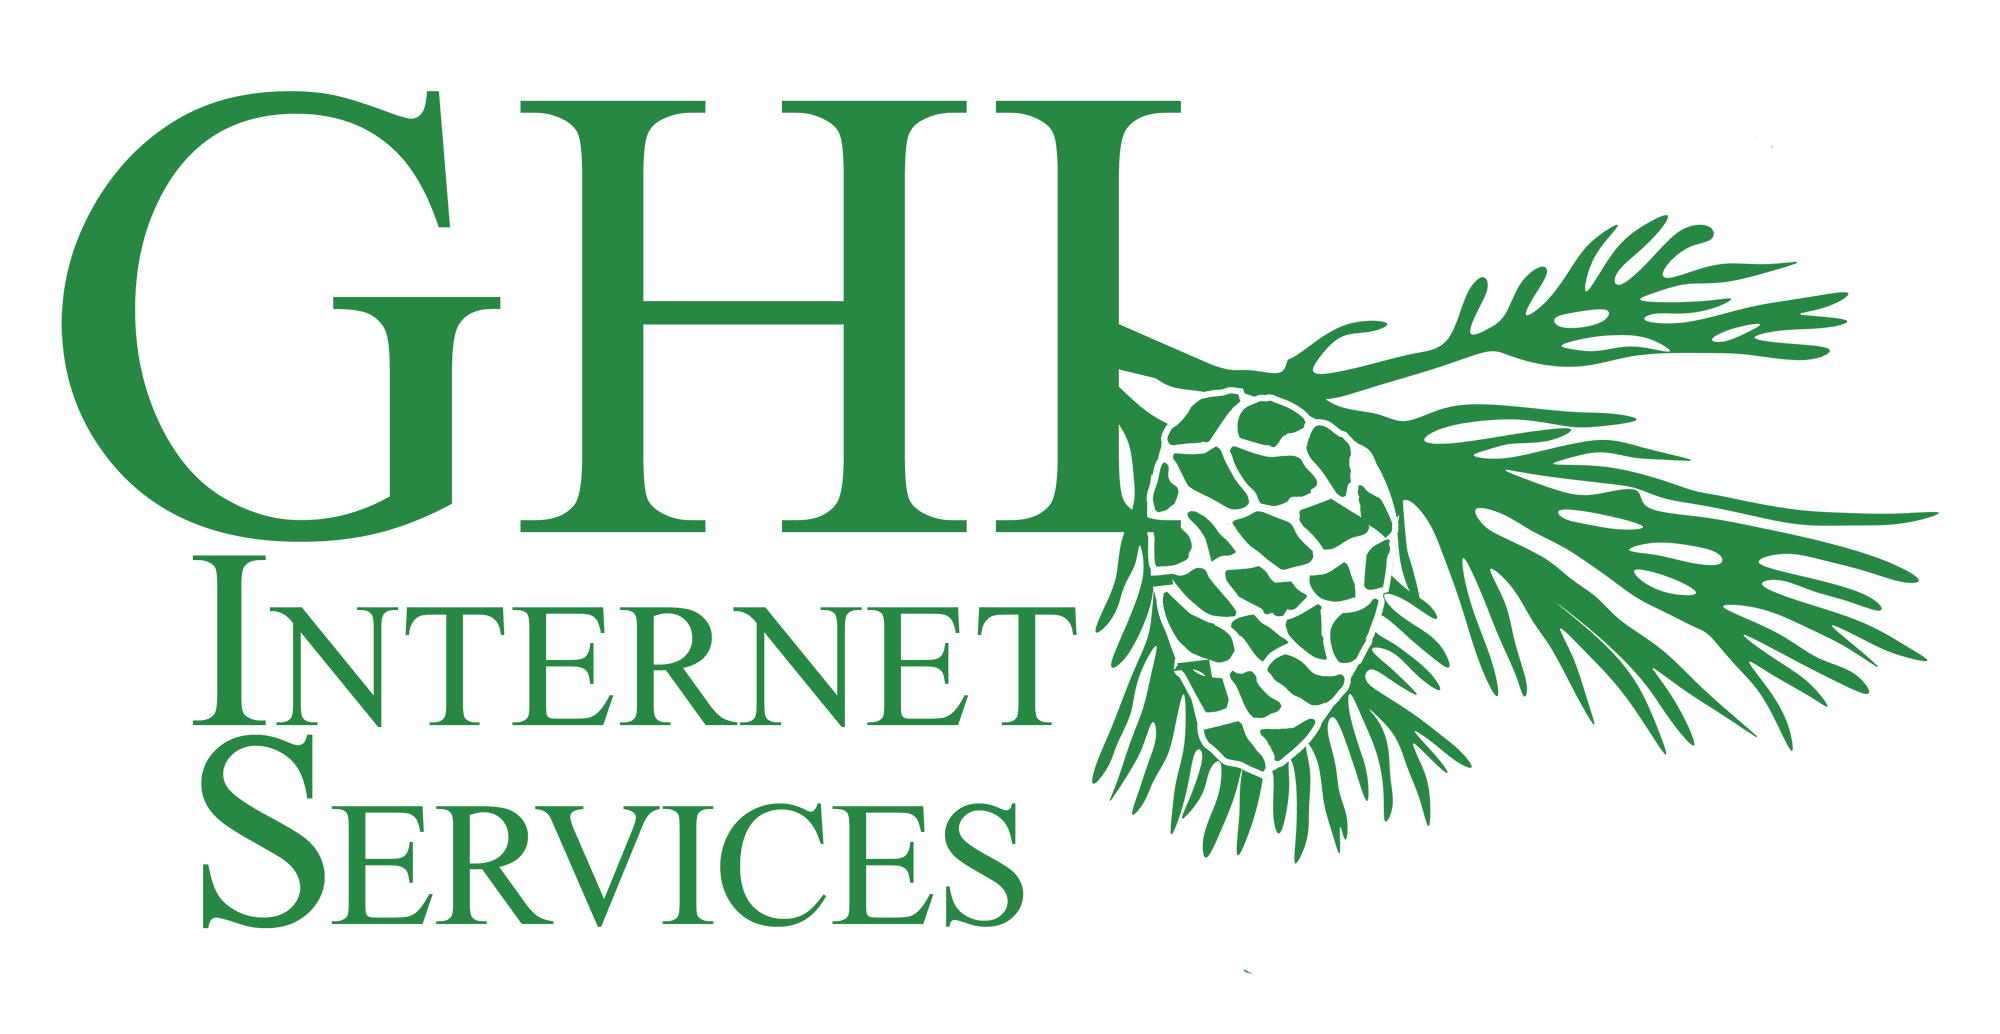 GHI Internet Services